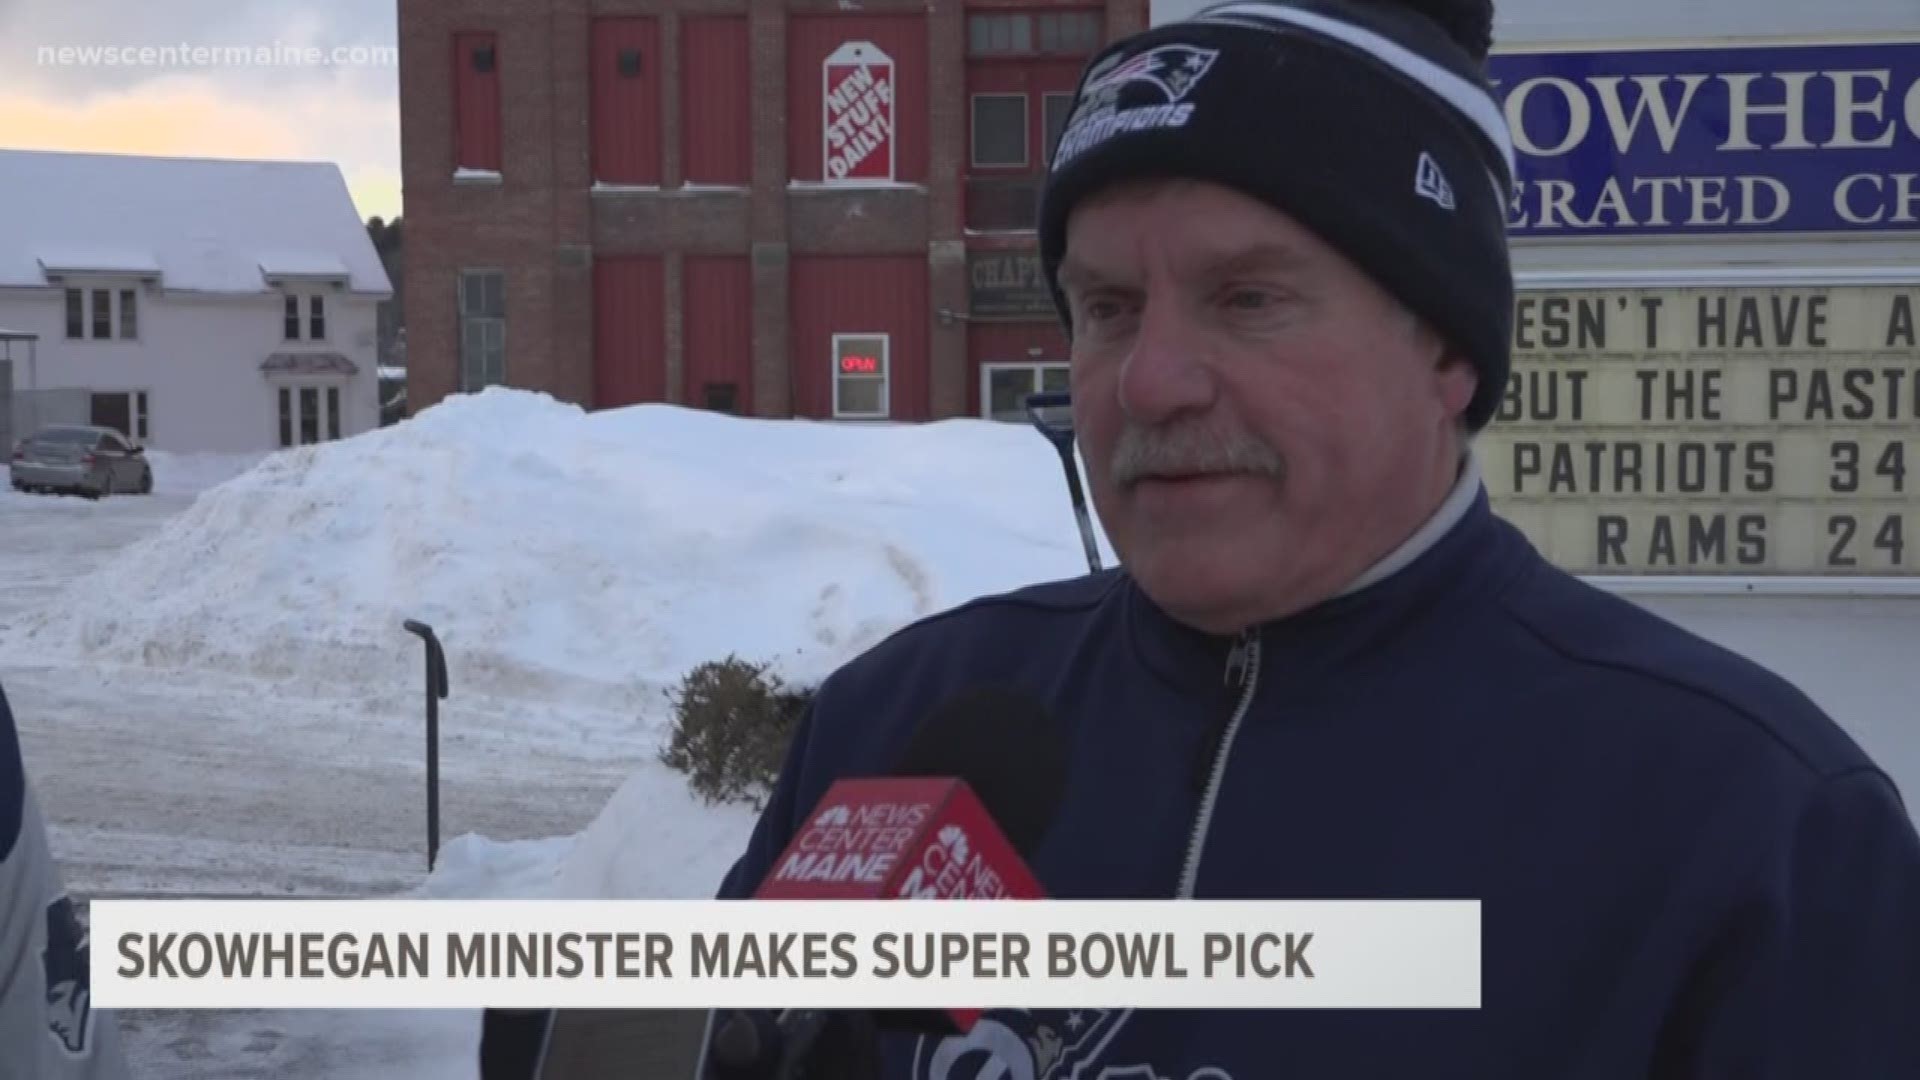 The Skowhegan minister who perfectly predicted the Patriots vs. Chiefs AFC game outcome makes his prediction for the Super Bowl.